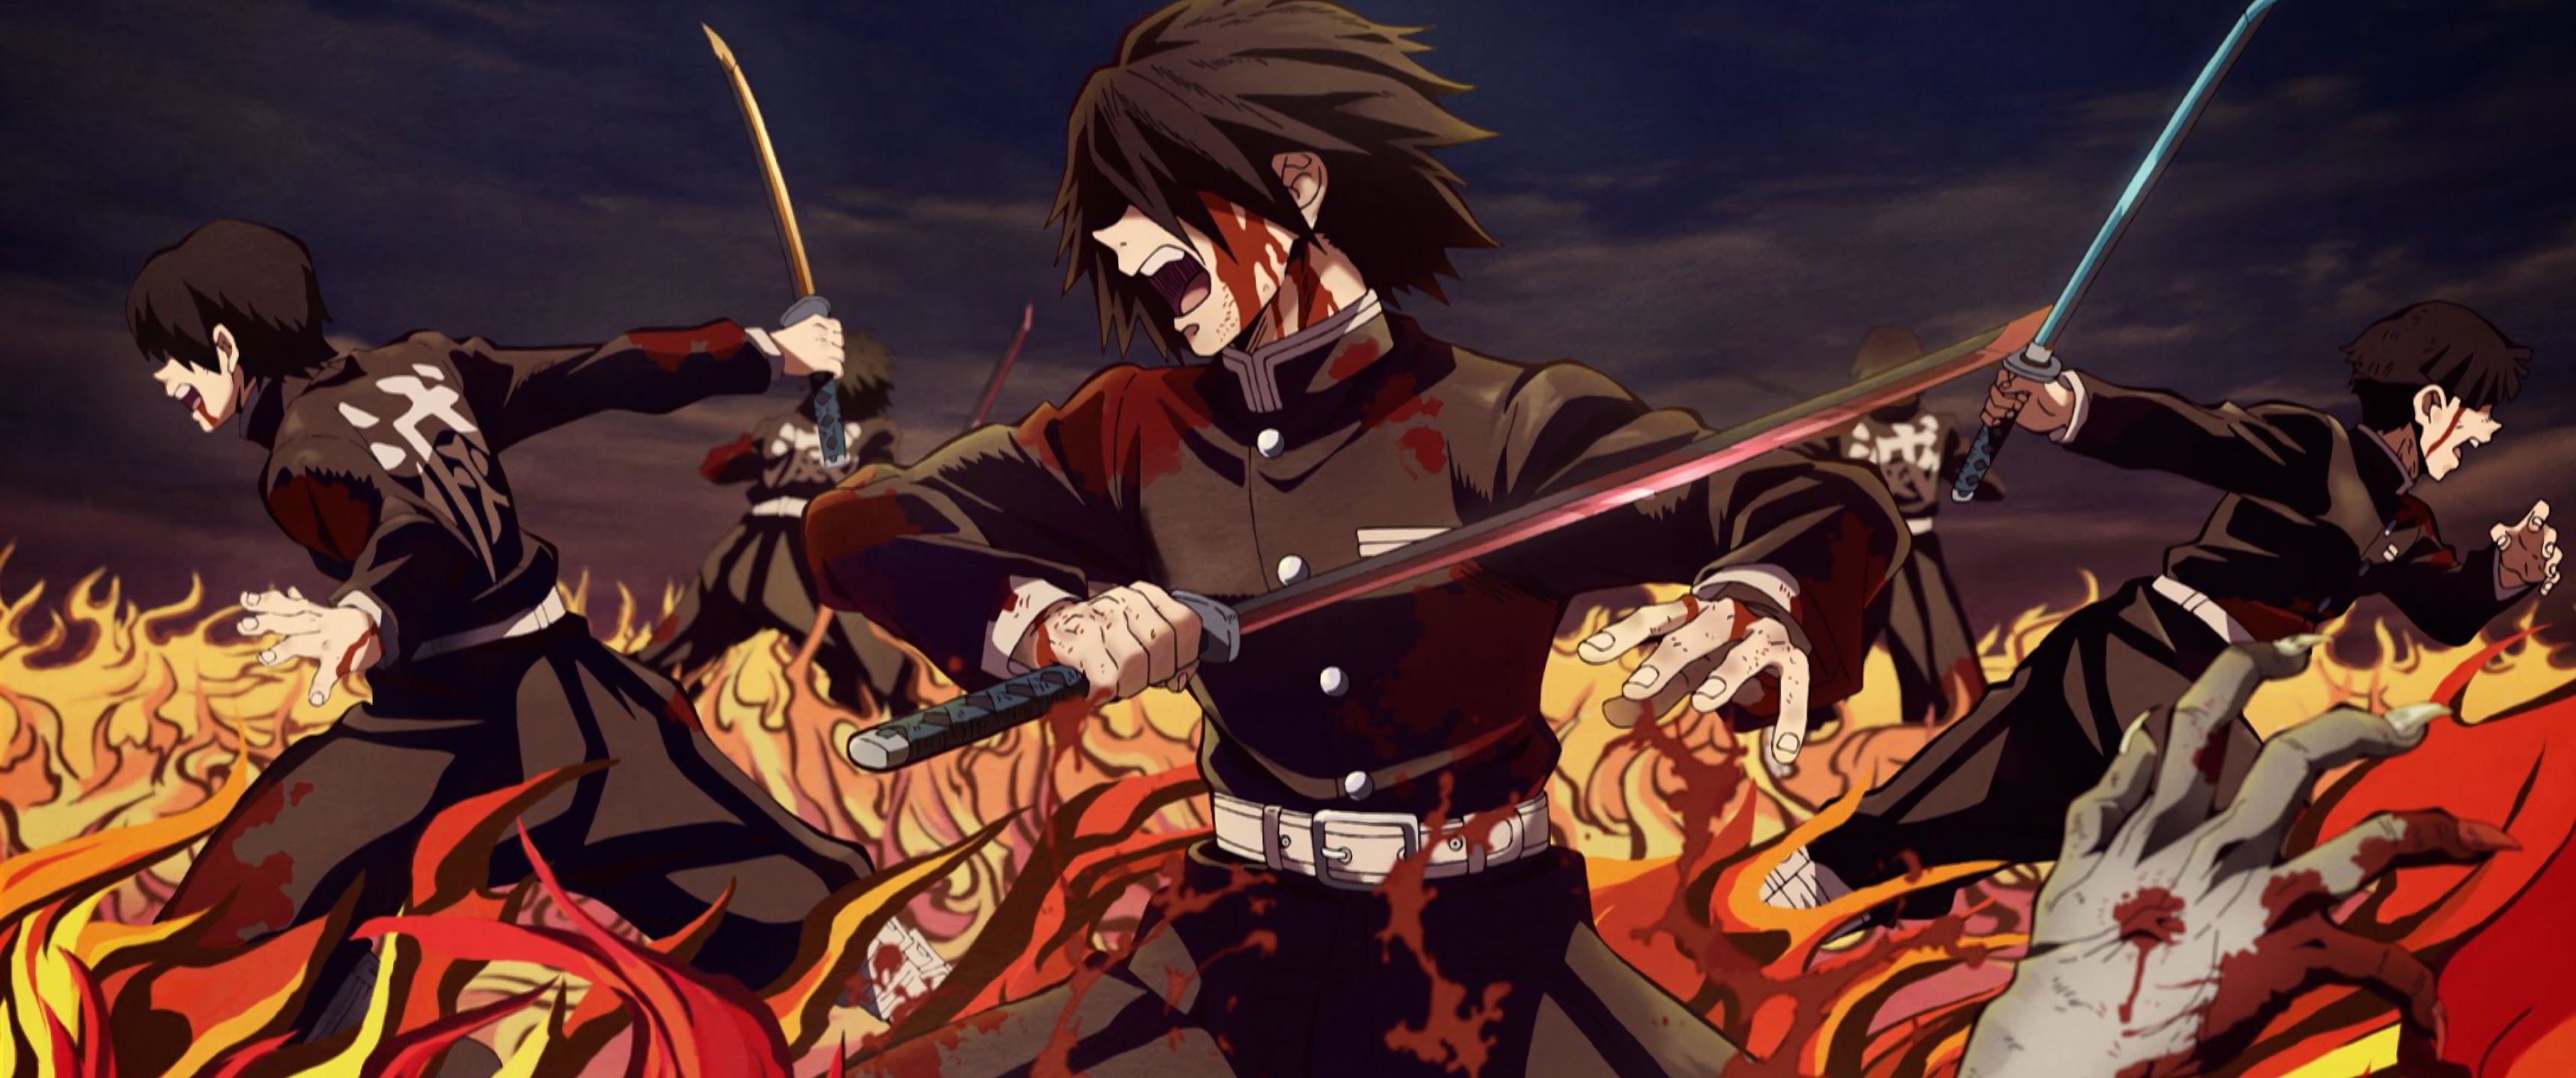 The three main characters of Fire Force, Shinra, Akitarou, and Arthur, stand in a line holding their swords in front of them, surrounded by flames - Demon Slayer